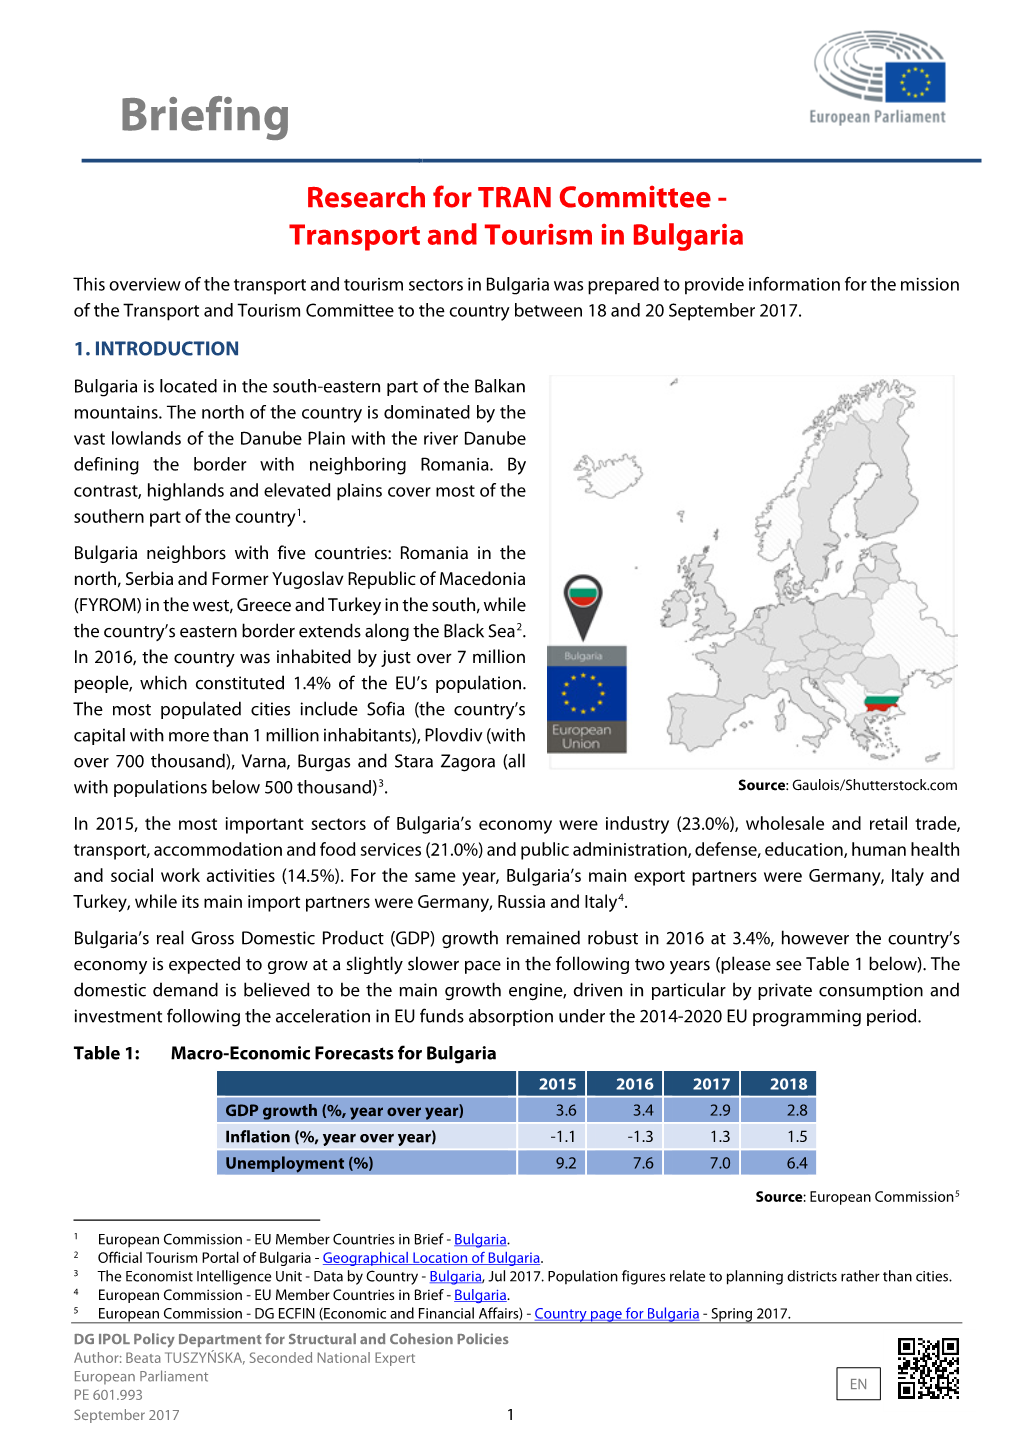 Research for TRAN Committee - Transport and Tourism in Bulgaria